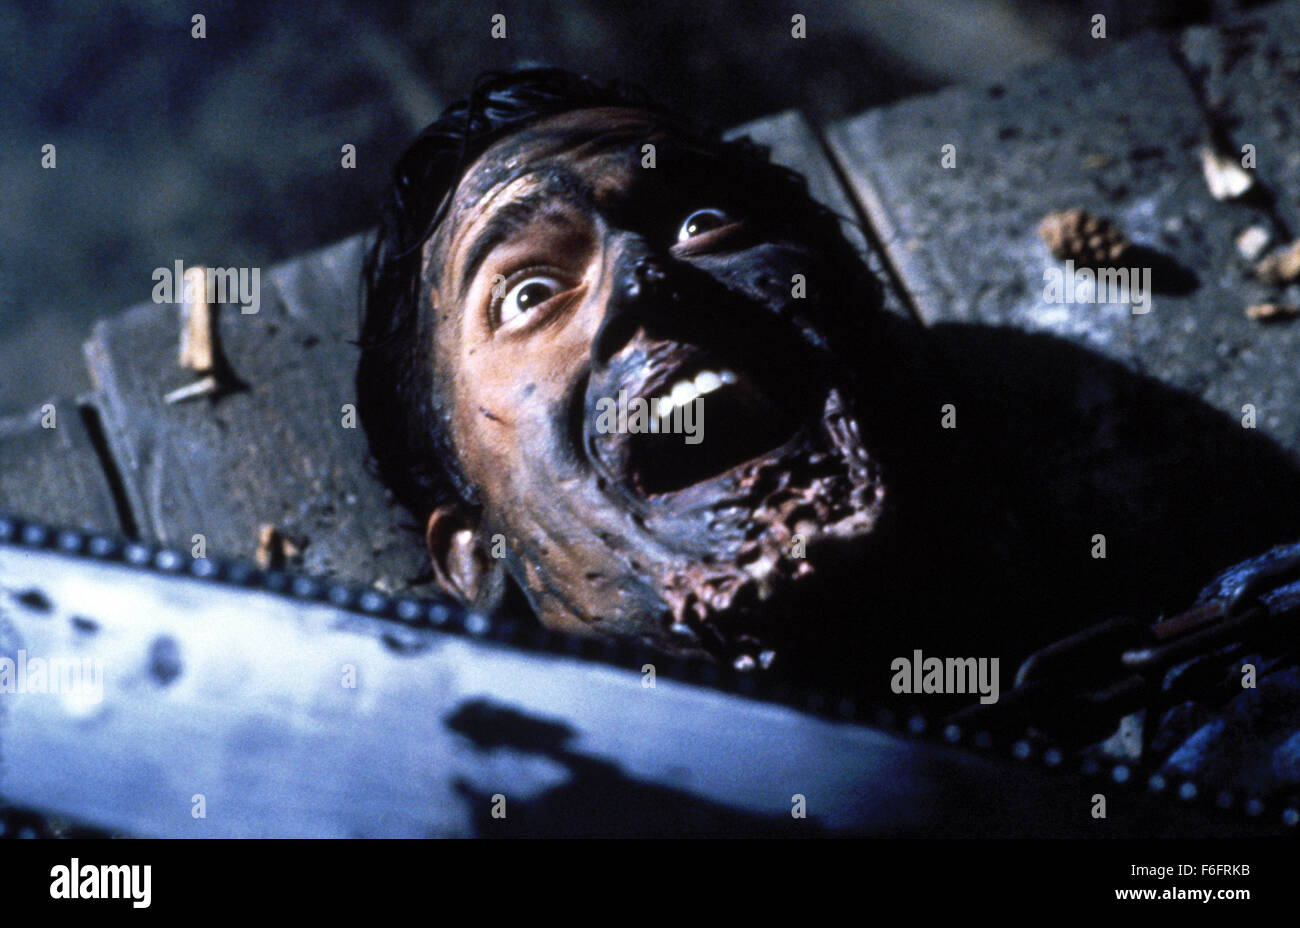 Feb 11, 1993; Los Angeles, CA, USA; BRUCE CAMPBELL as Ash in the action, adventure, comic, fantasy film ''Army of Darkness'' directed by Sam Raimi. Stock Photo